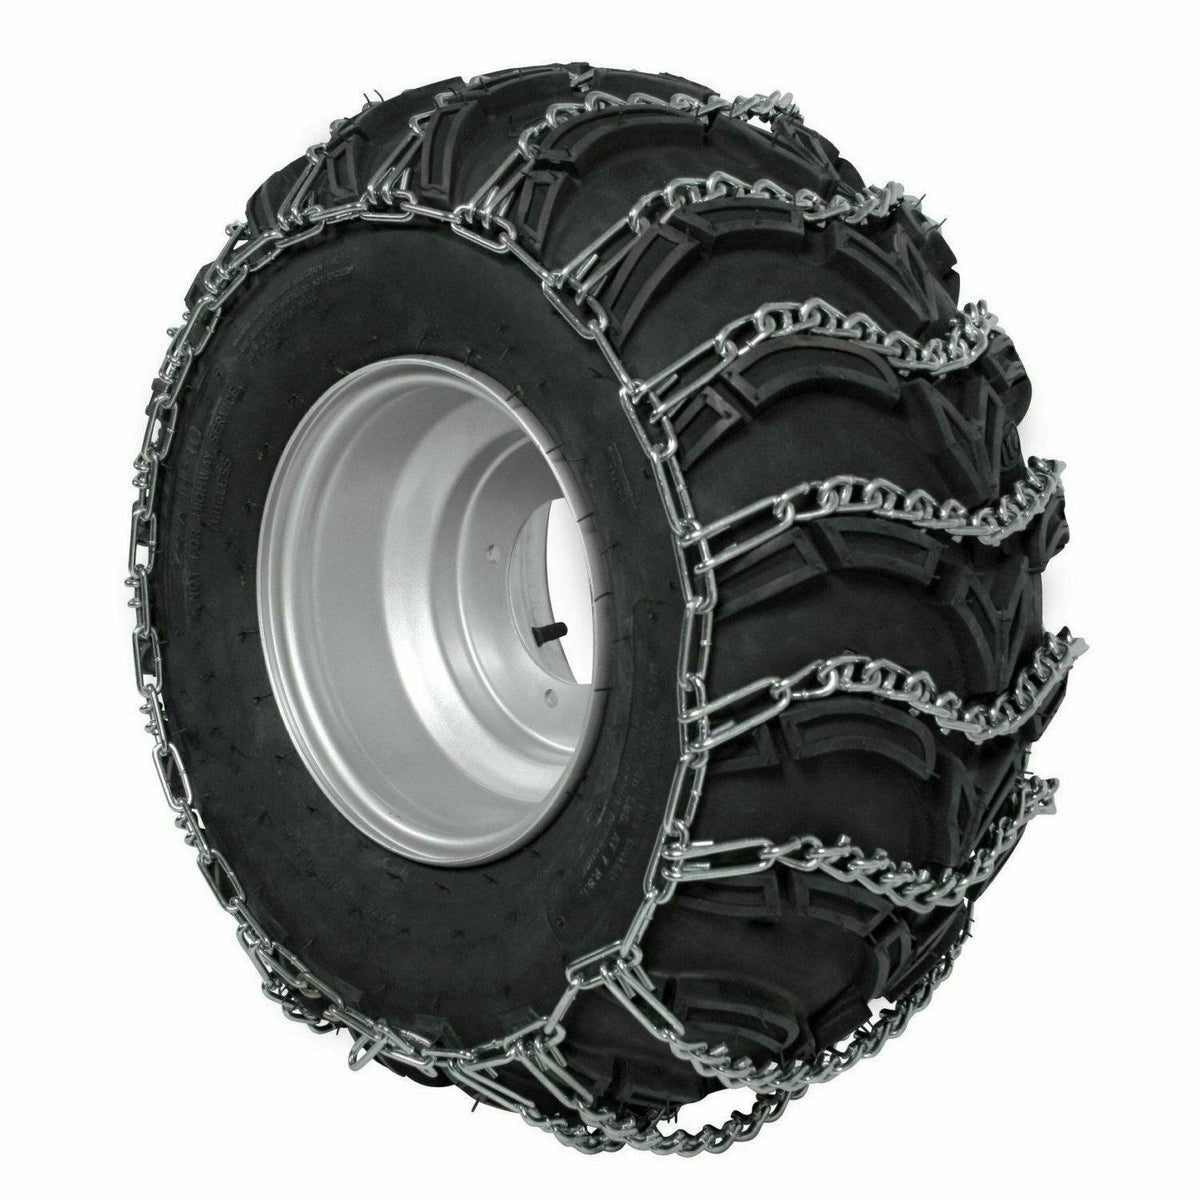 Kimpex 2 Space Tire Chain 51x14